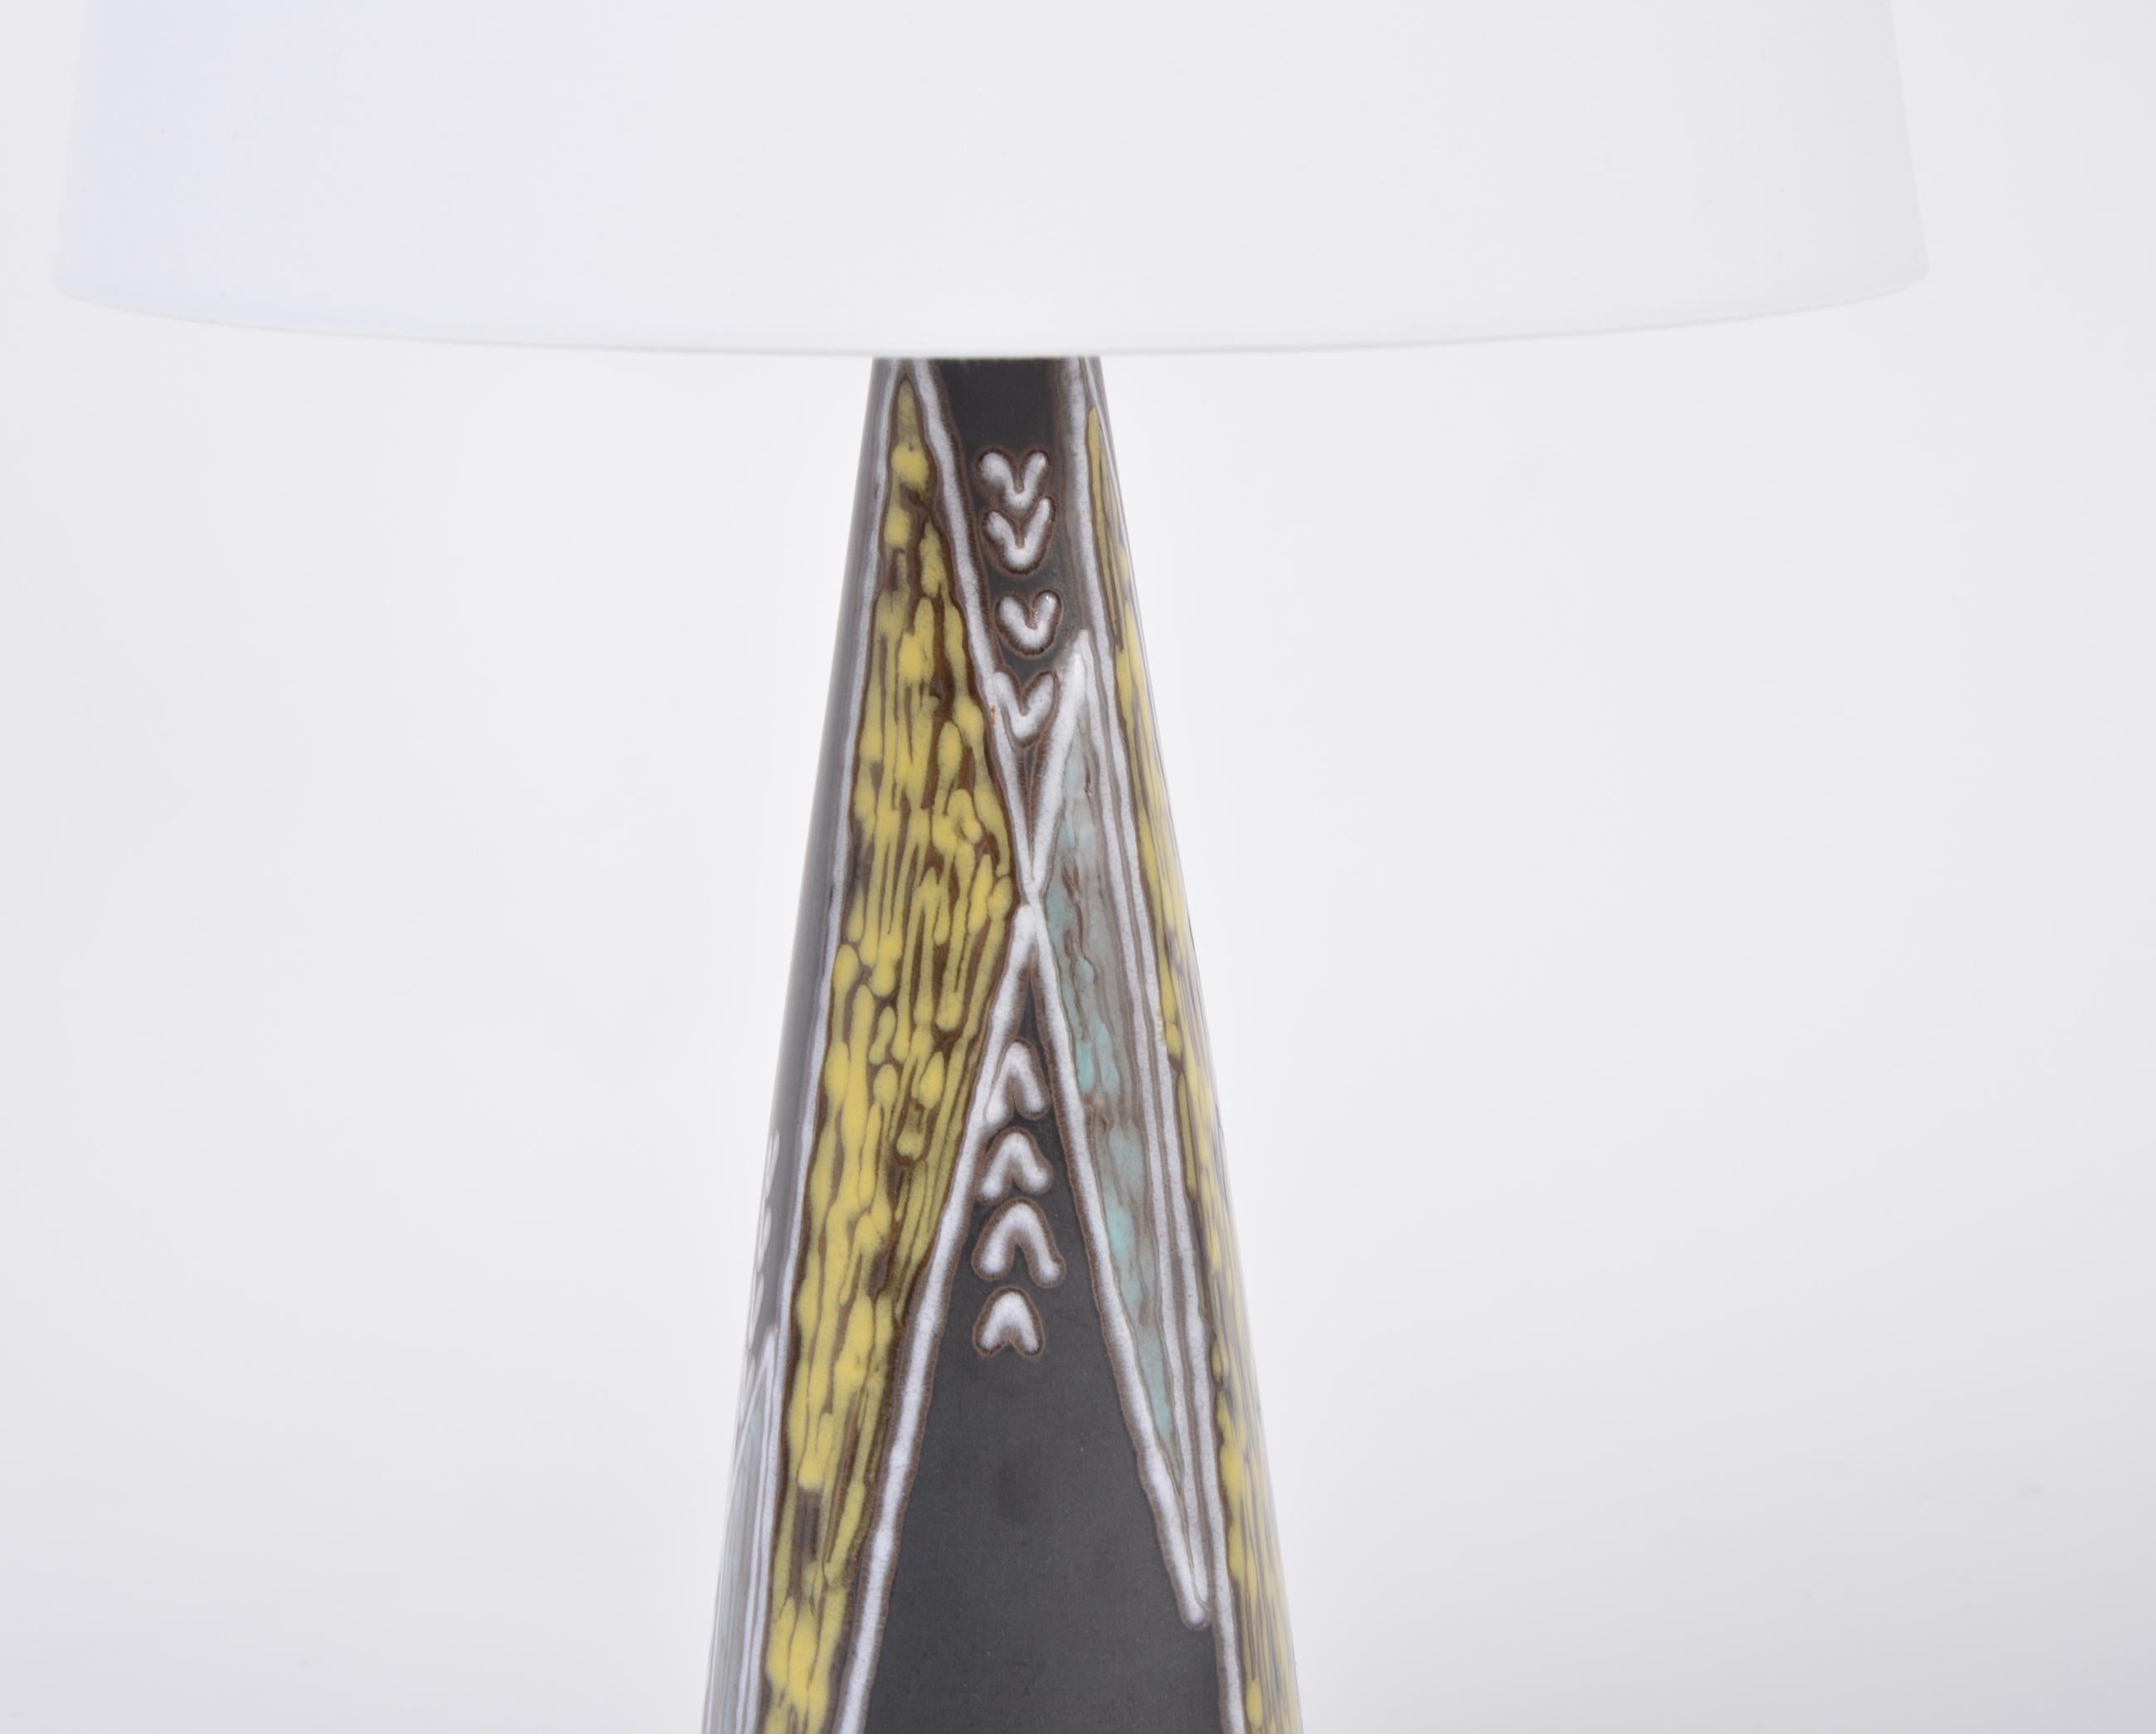 Tall Black Danish Midcentury Ceramic Table Lamp by Holm Sorensen for Søholm In Good Condition For Sale In Berlin, DE